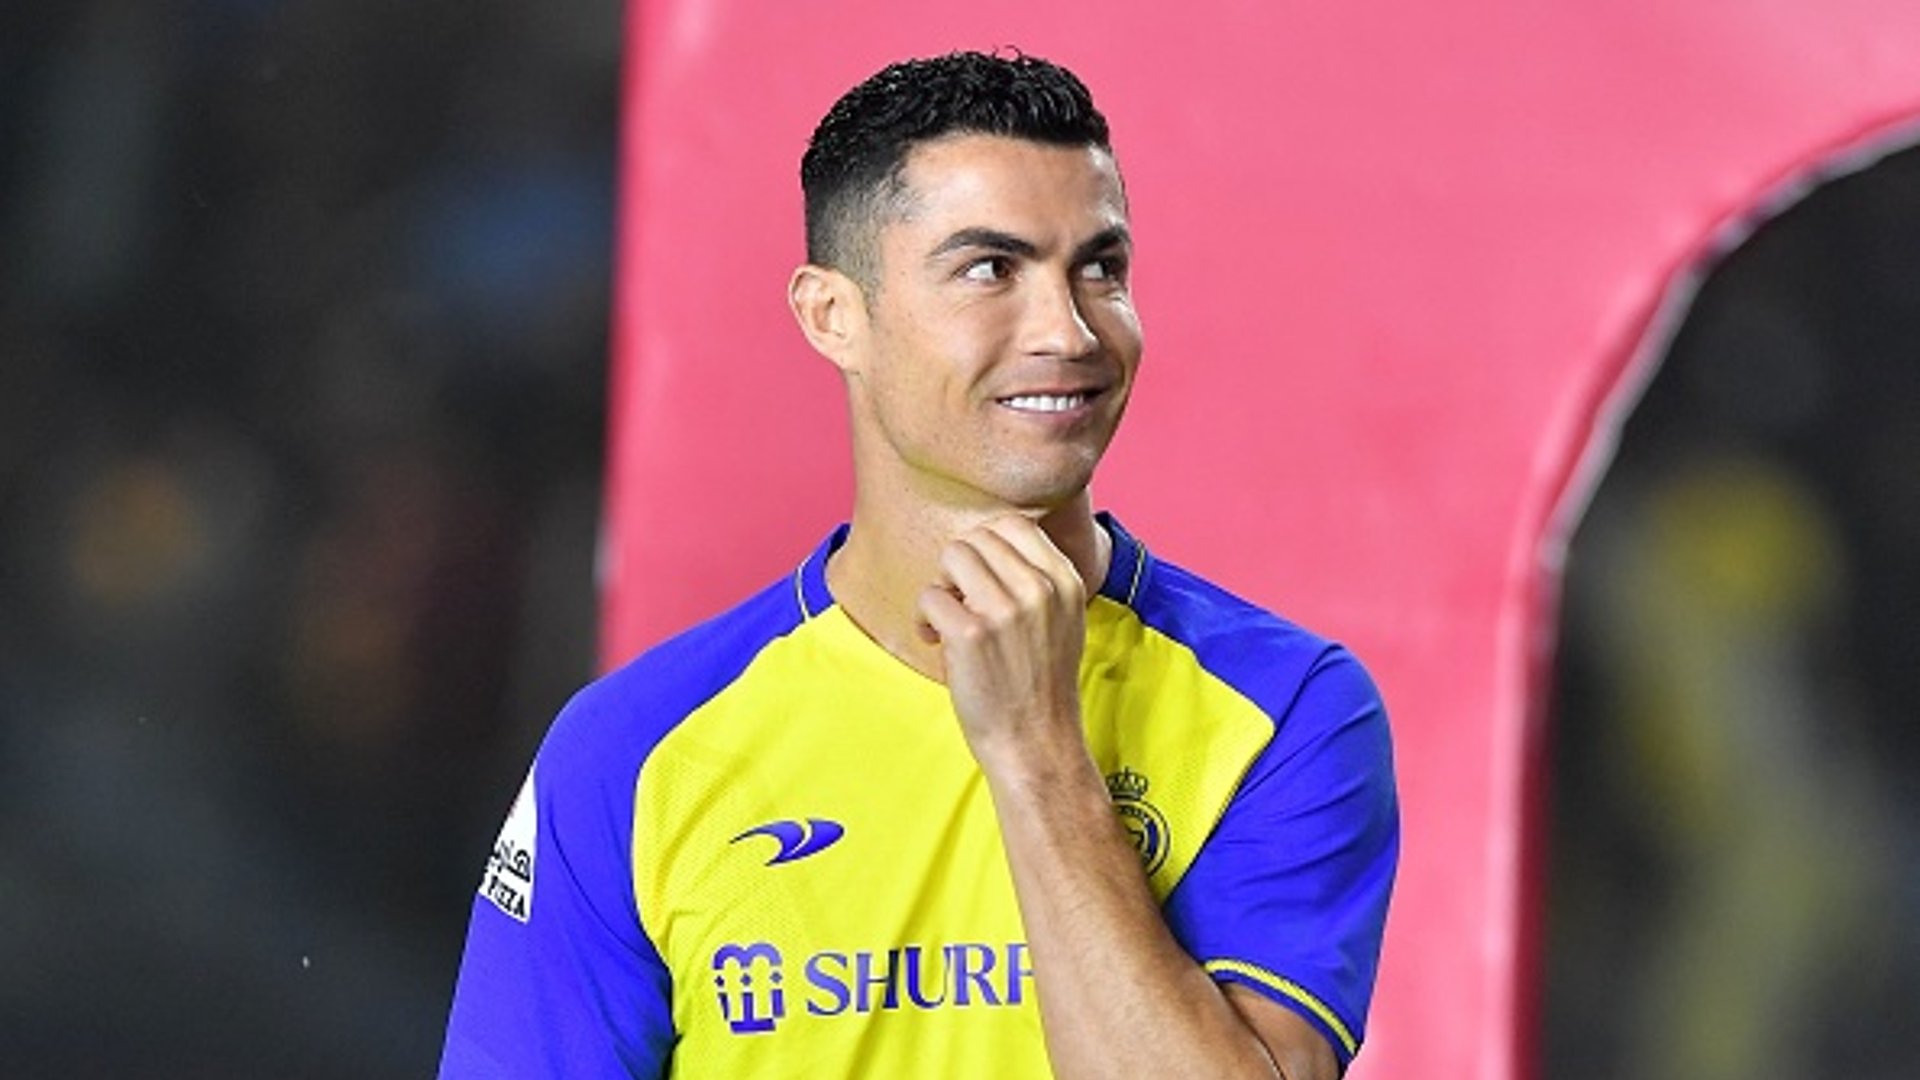 WATCH: Cristiano Ronaldo Gets Insane Reception From Al Nassr Fans During Transfer Unveiling